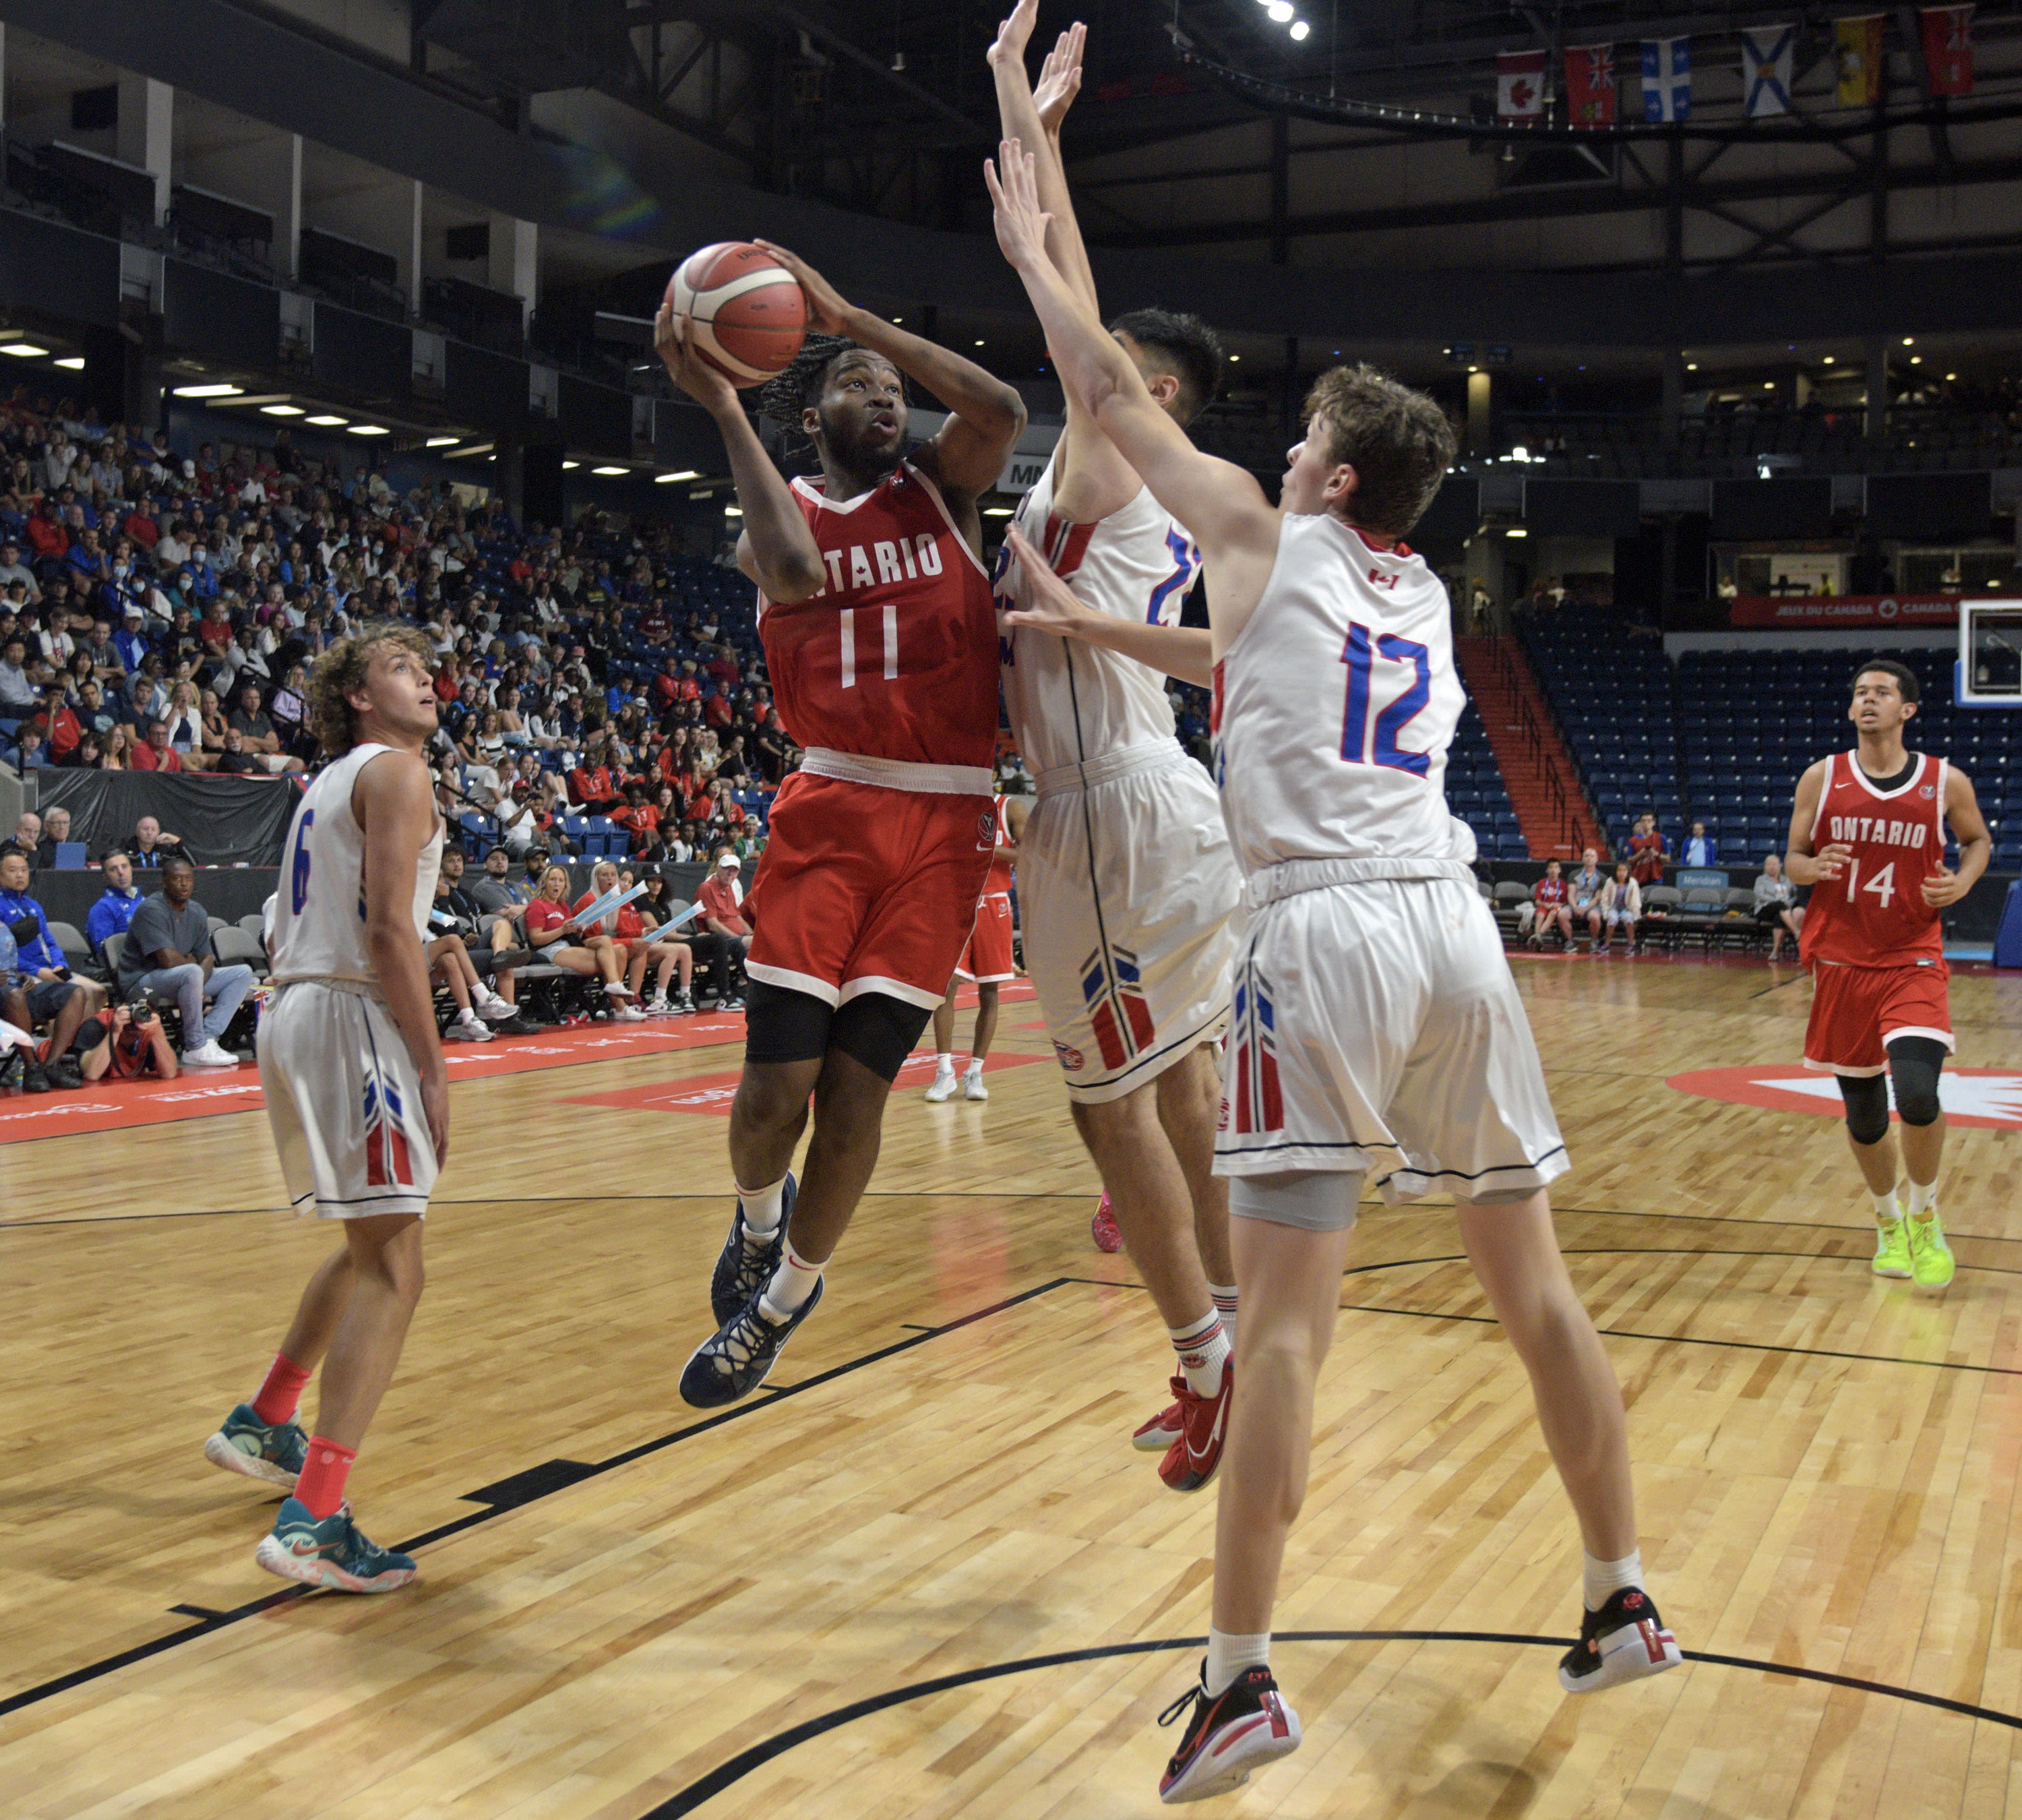 A basketball championship game at the Meridian Centre in St. Catharines.